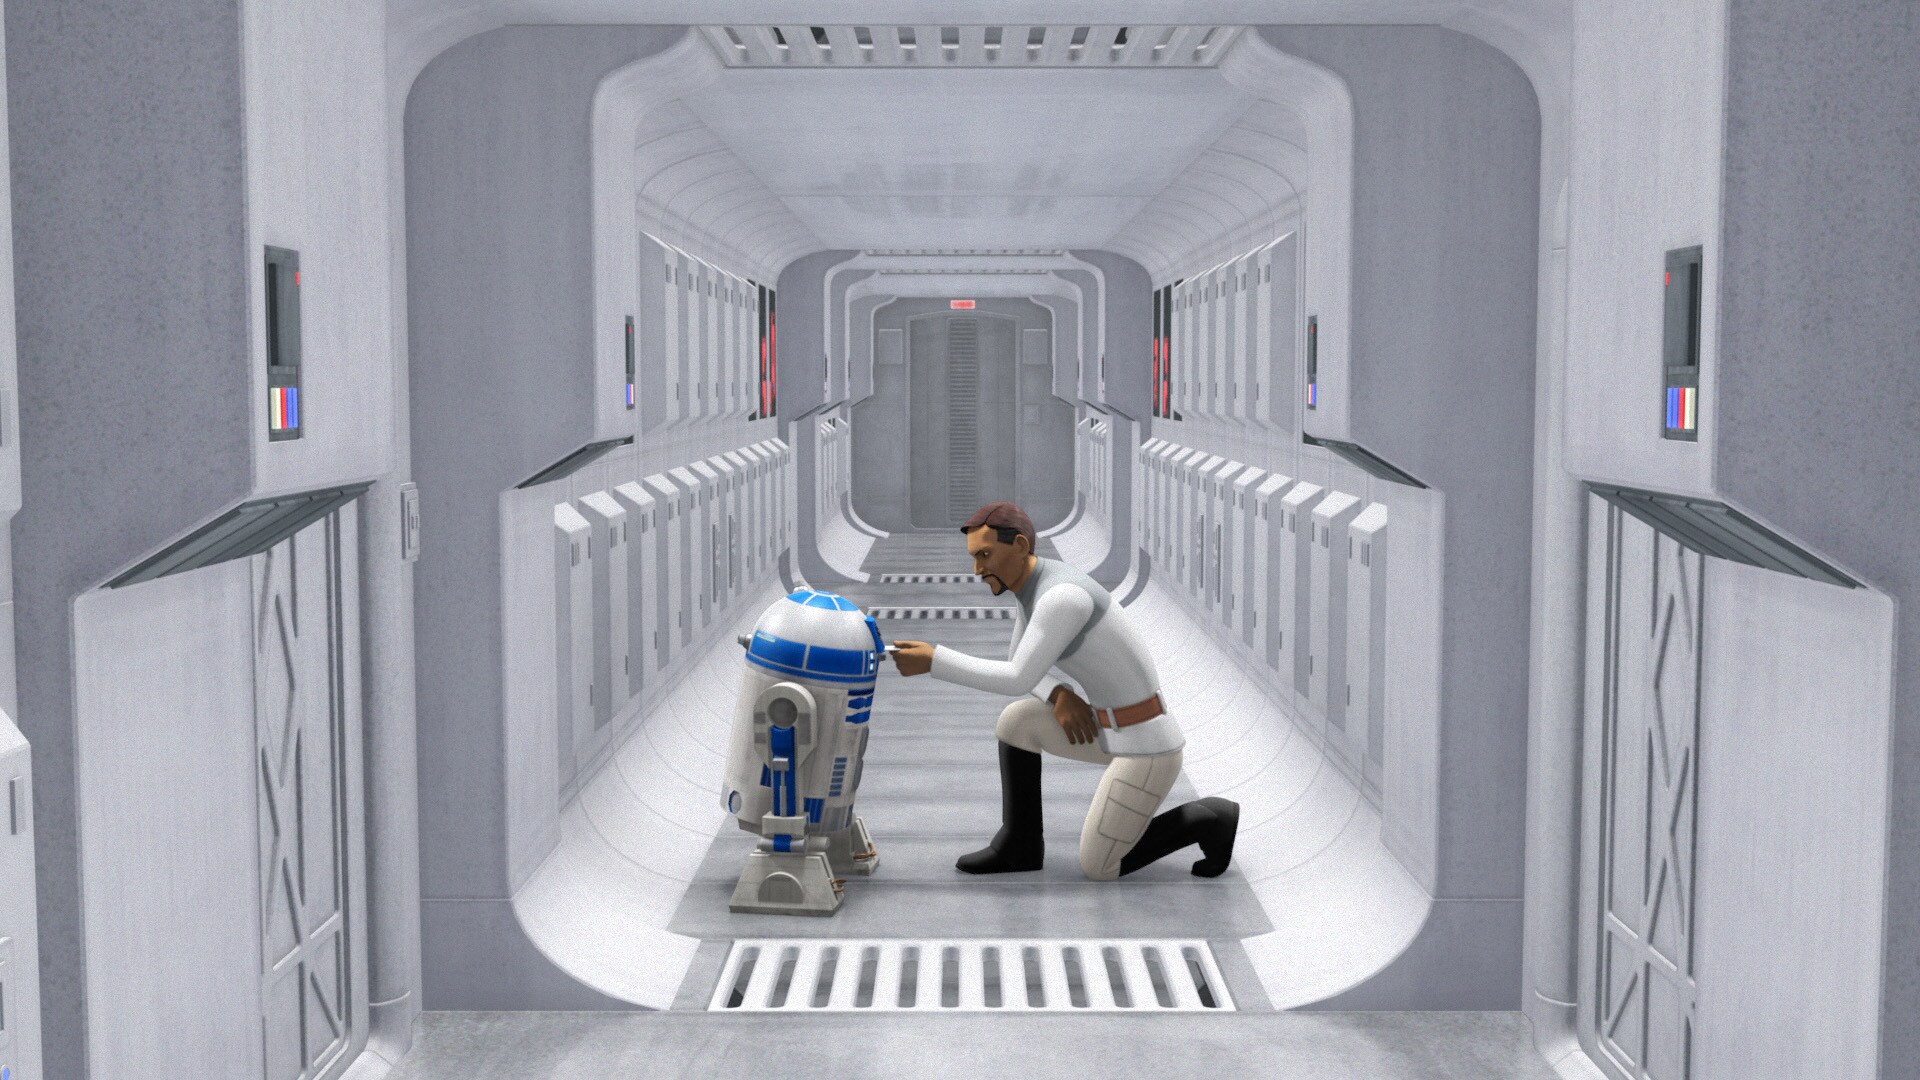 The final shot of Bail Organa inserting a data card in R2-D2 is framed in a way that calls back t...